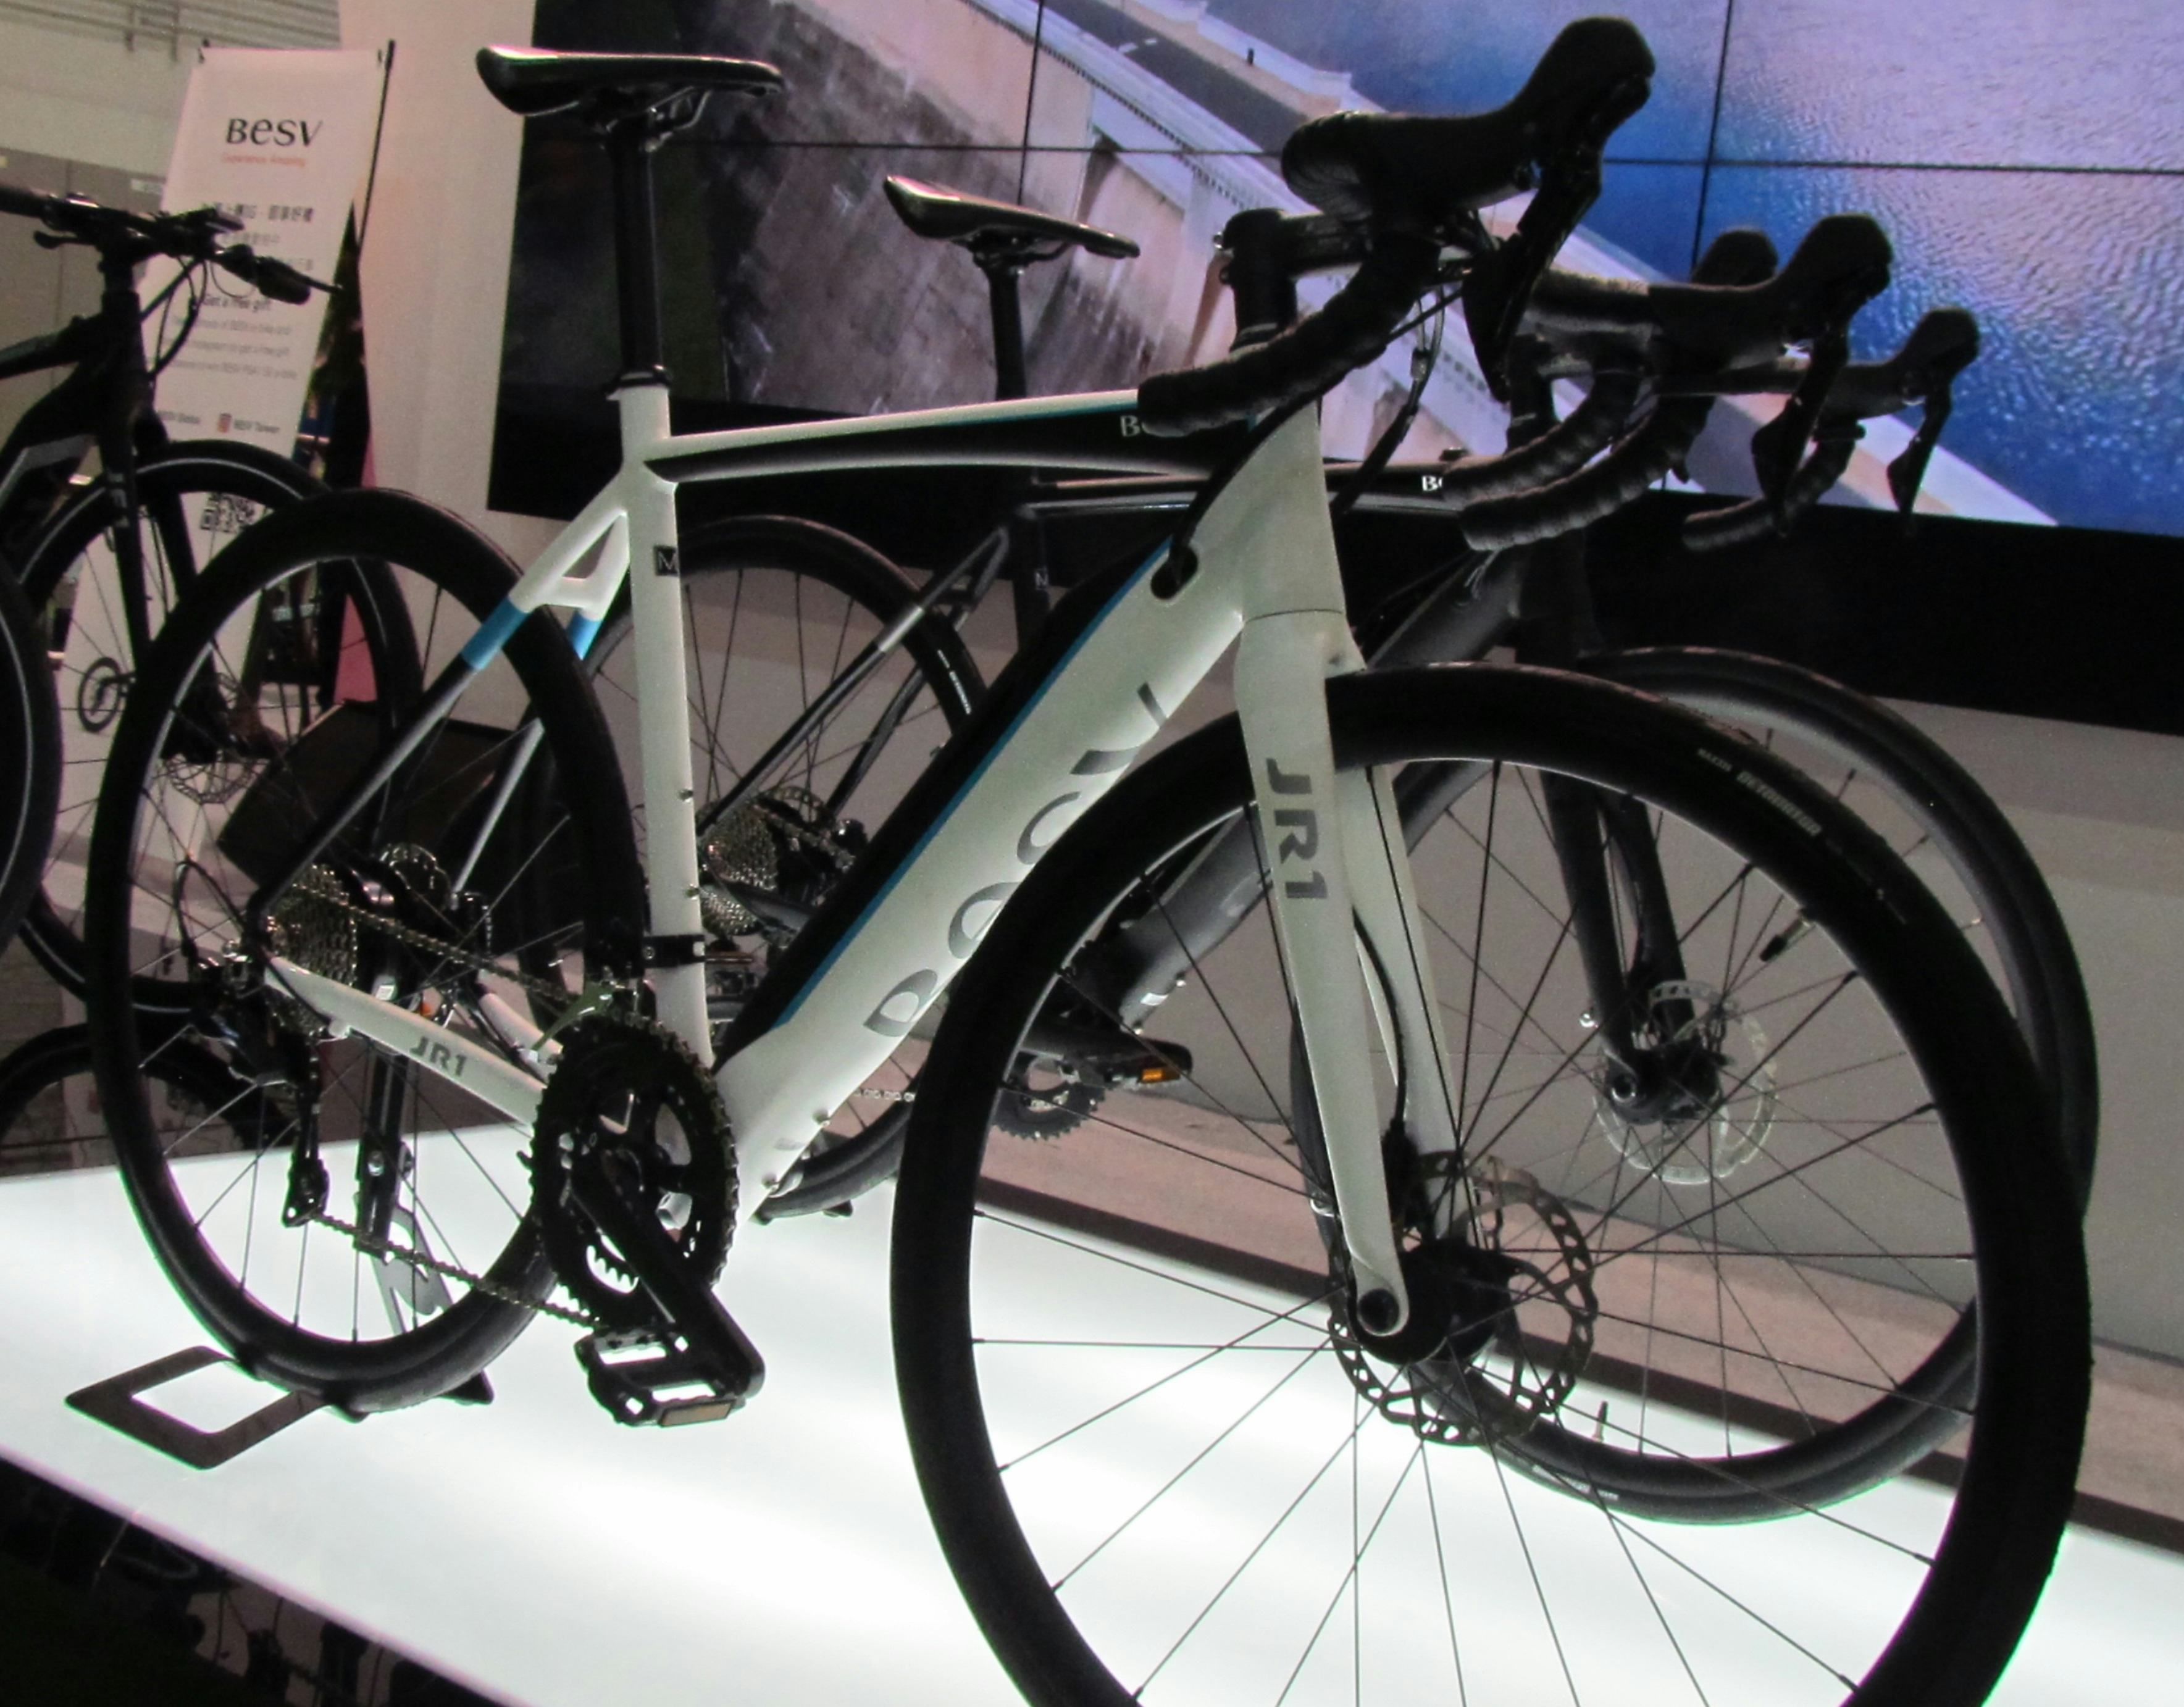 It’s not business as usual at the Taipei Cycle Show which is taking place this week. – Photo Bike Europe